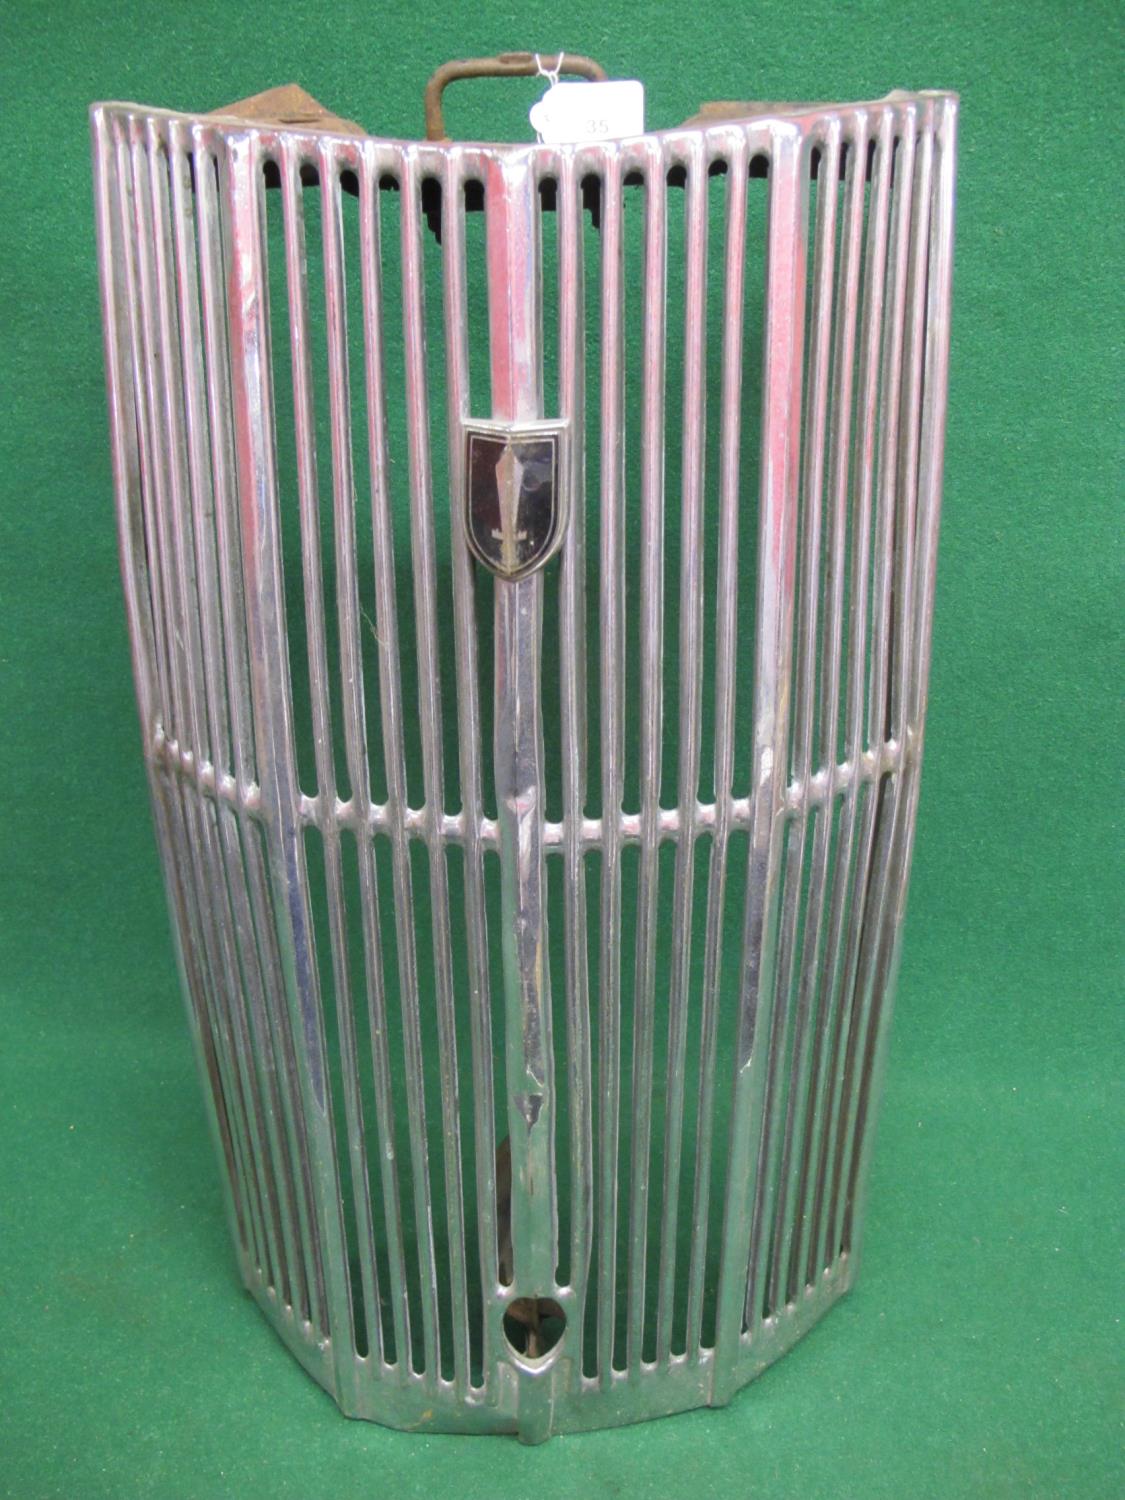 Vertical chromed radiator grill with starting handle hole and badge - 26" tall Please note